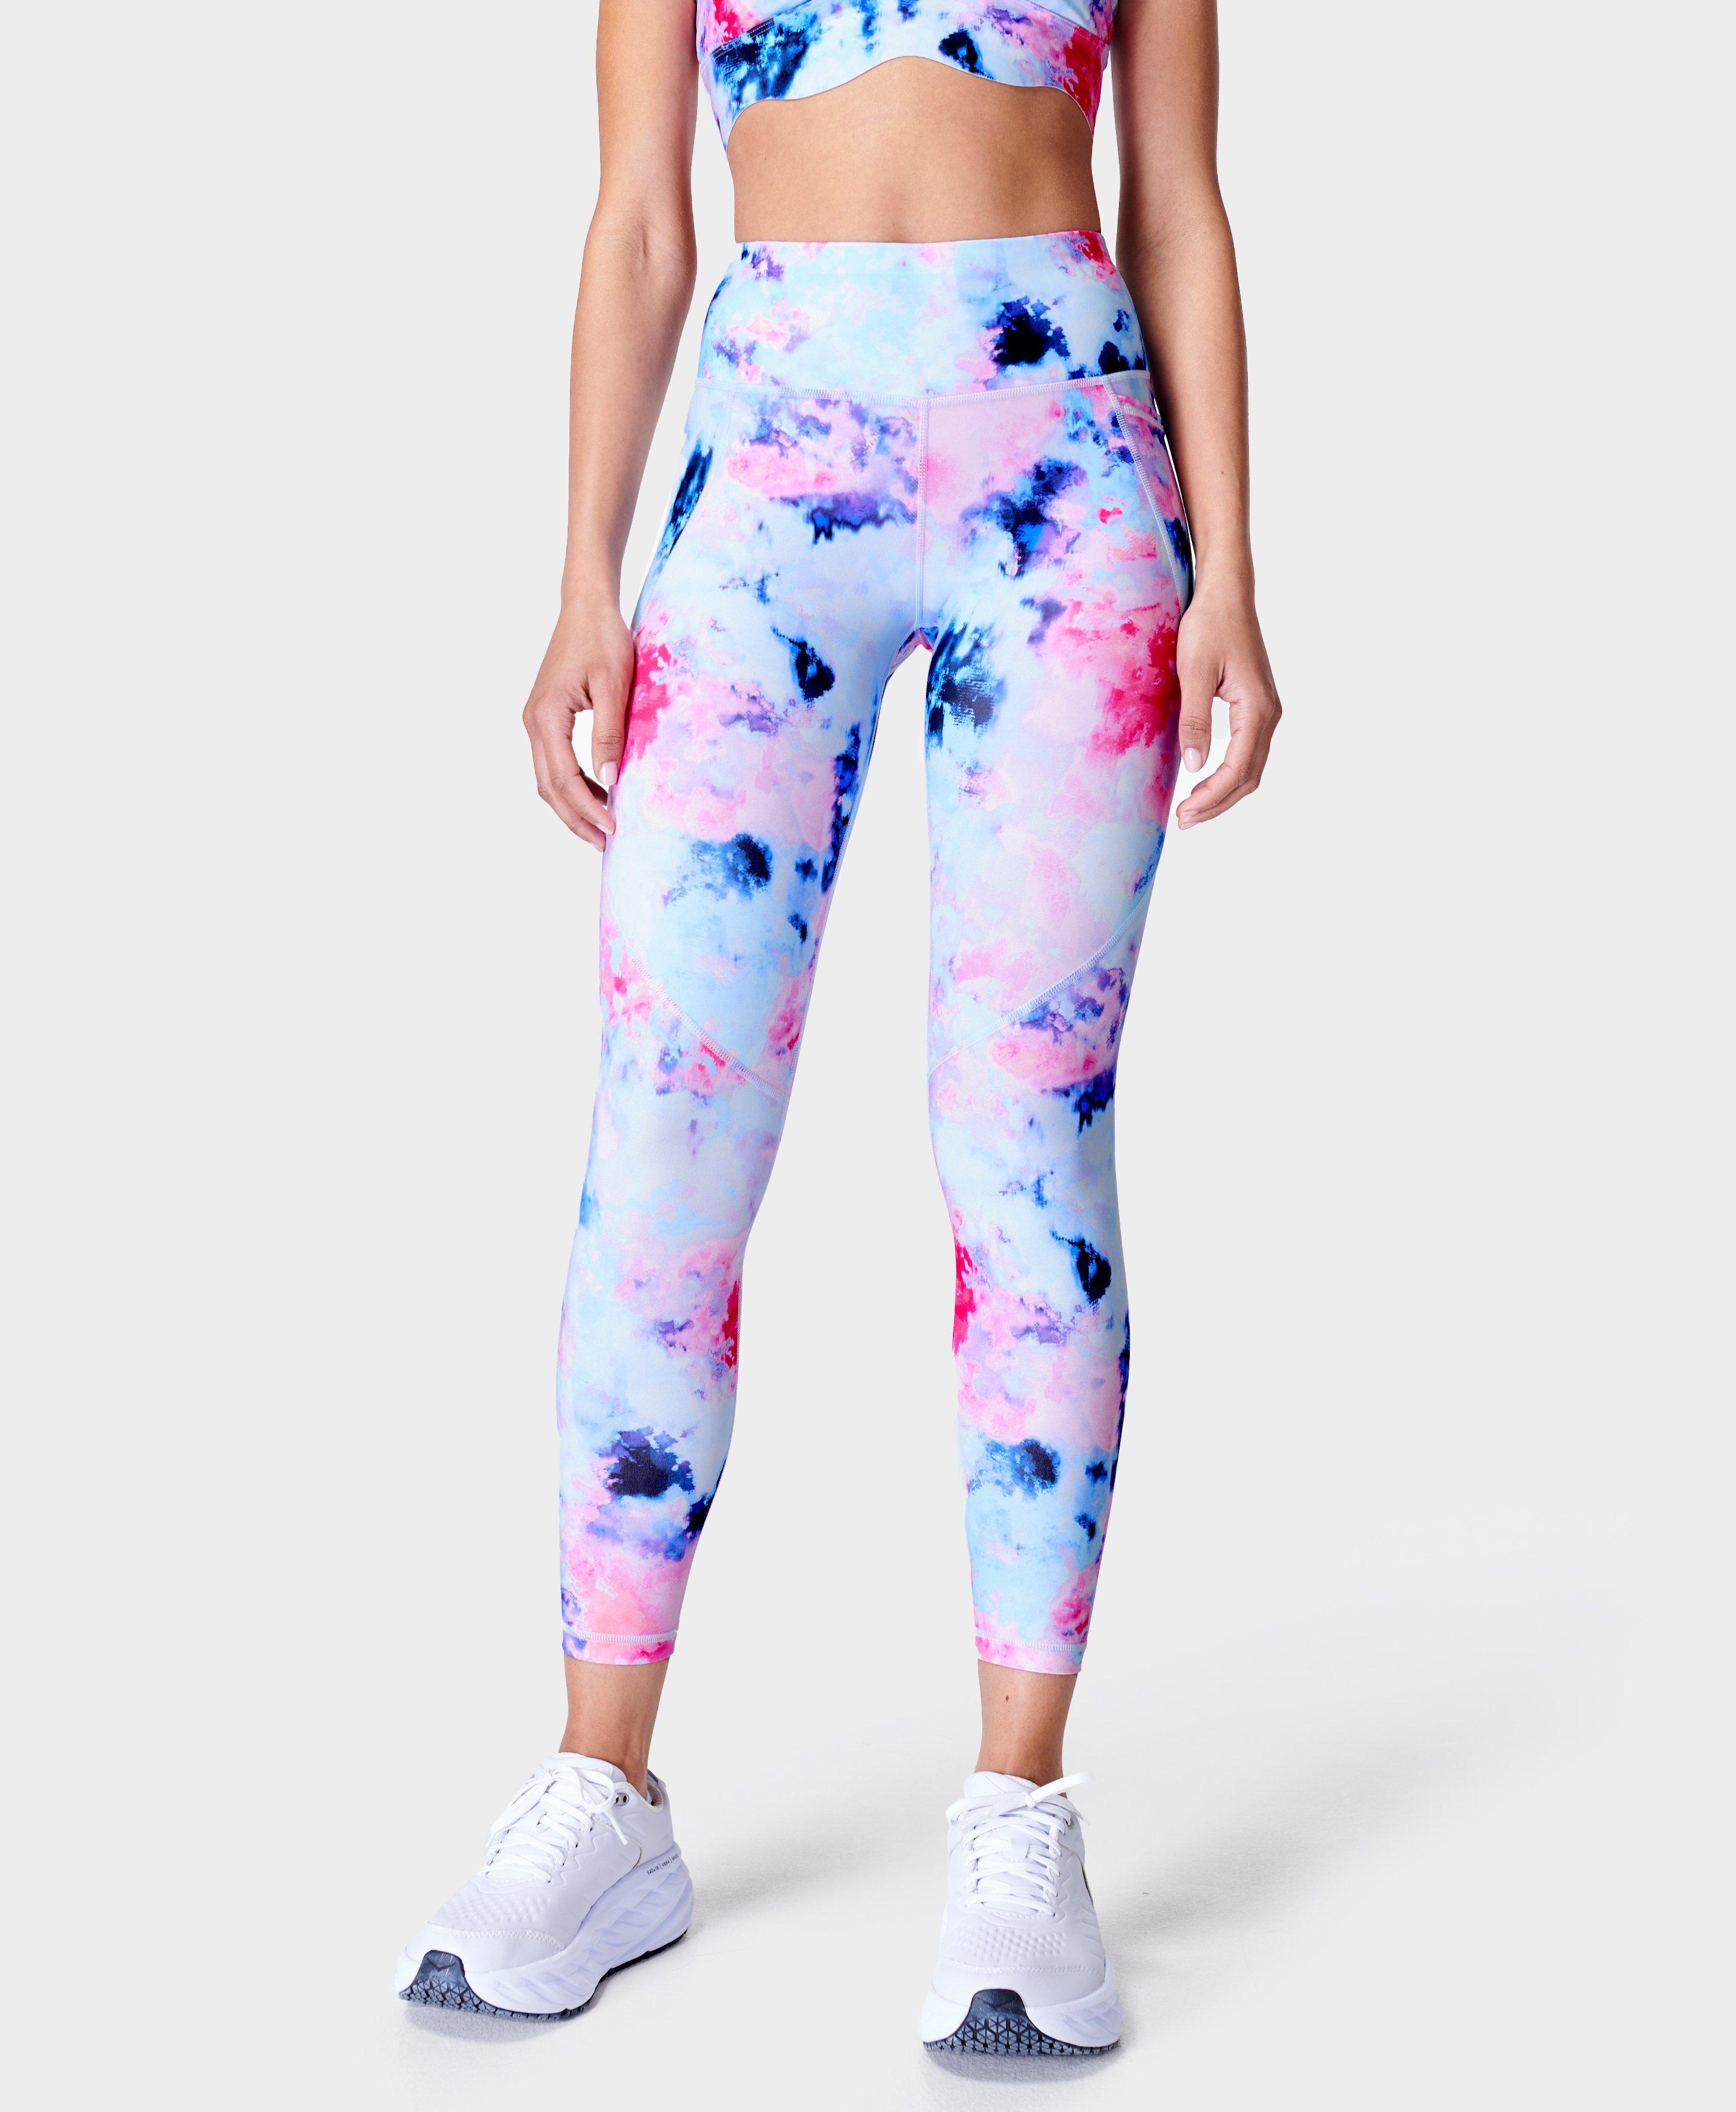 ADP ® Fluorescent stylish sports daily Joggers / leggings for